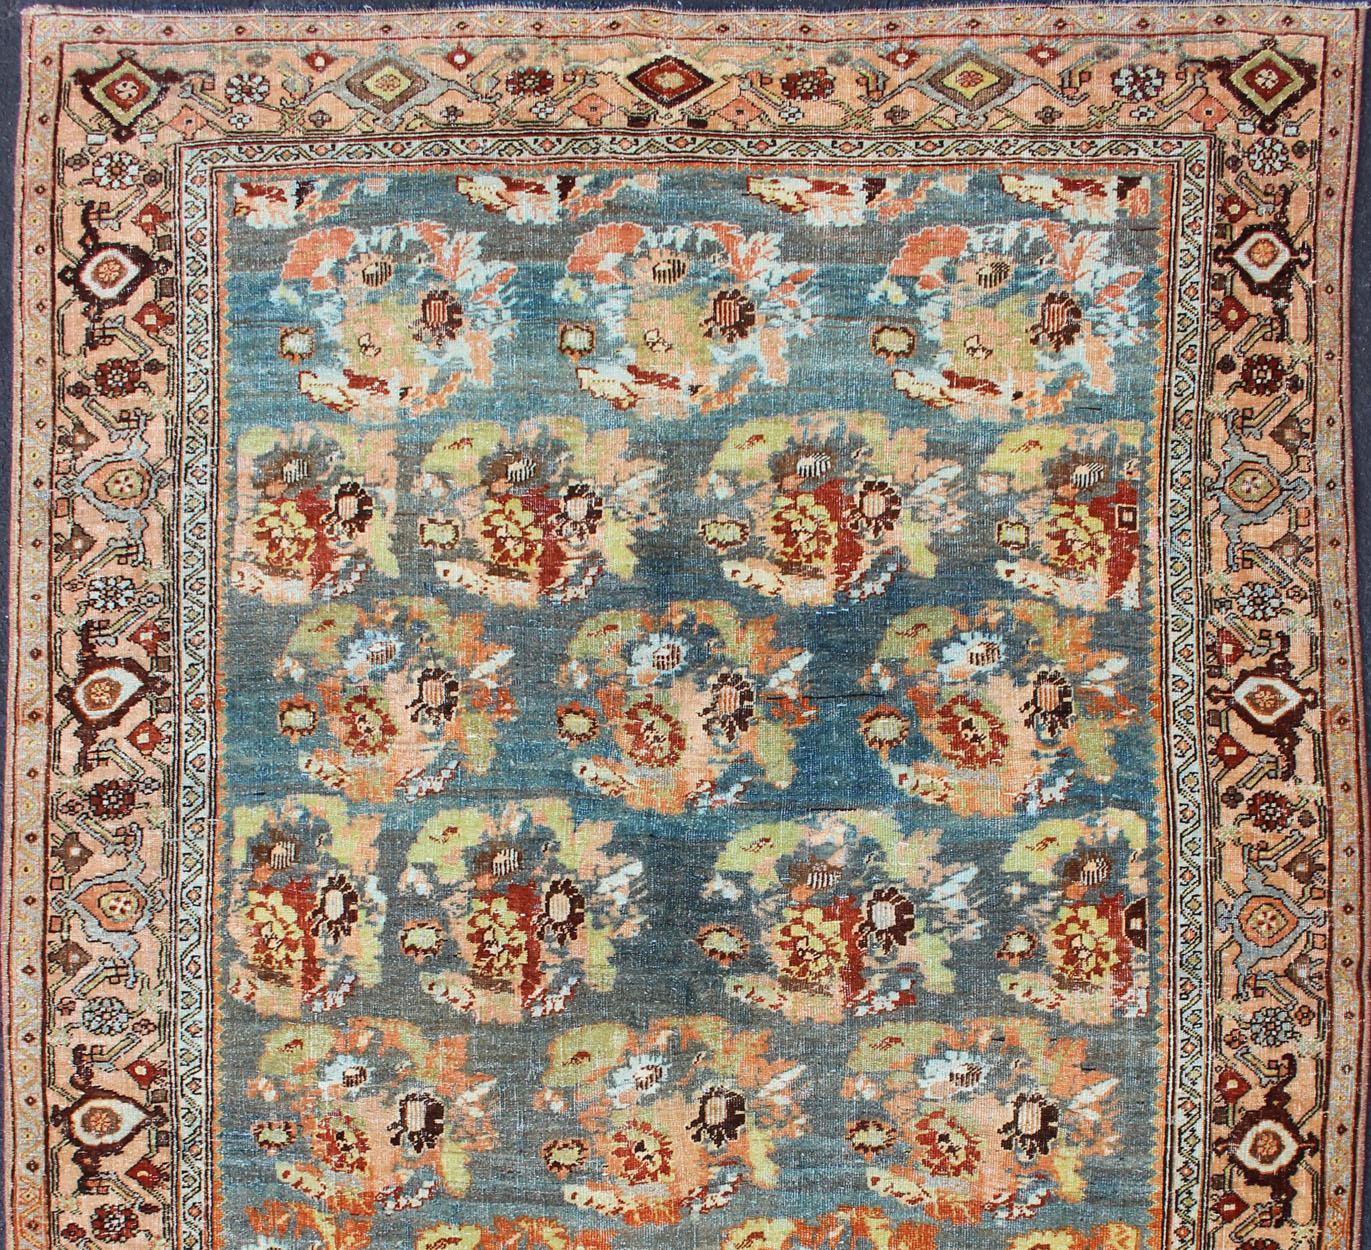 Ornate flower design Bidjar antique Persian rug in a variety of colors, rug SUS-2007-247, country of origin / type: Iran / Bidjar, circa 1910

This magnificent Bidjar with an exquisite, all-over pattern, rests beautifully on a light blue-colored